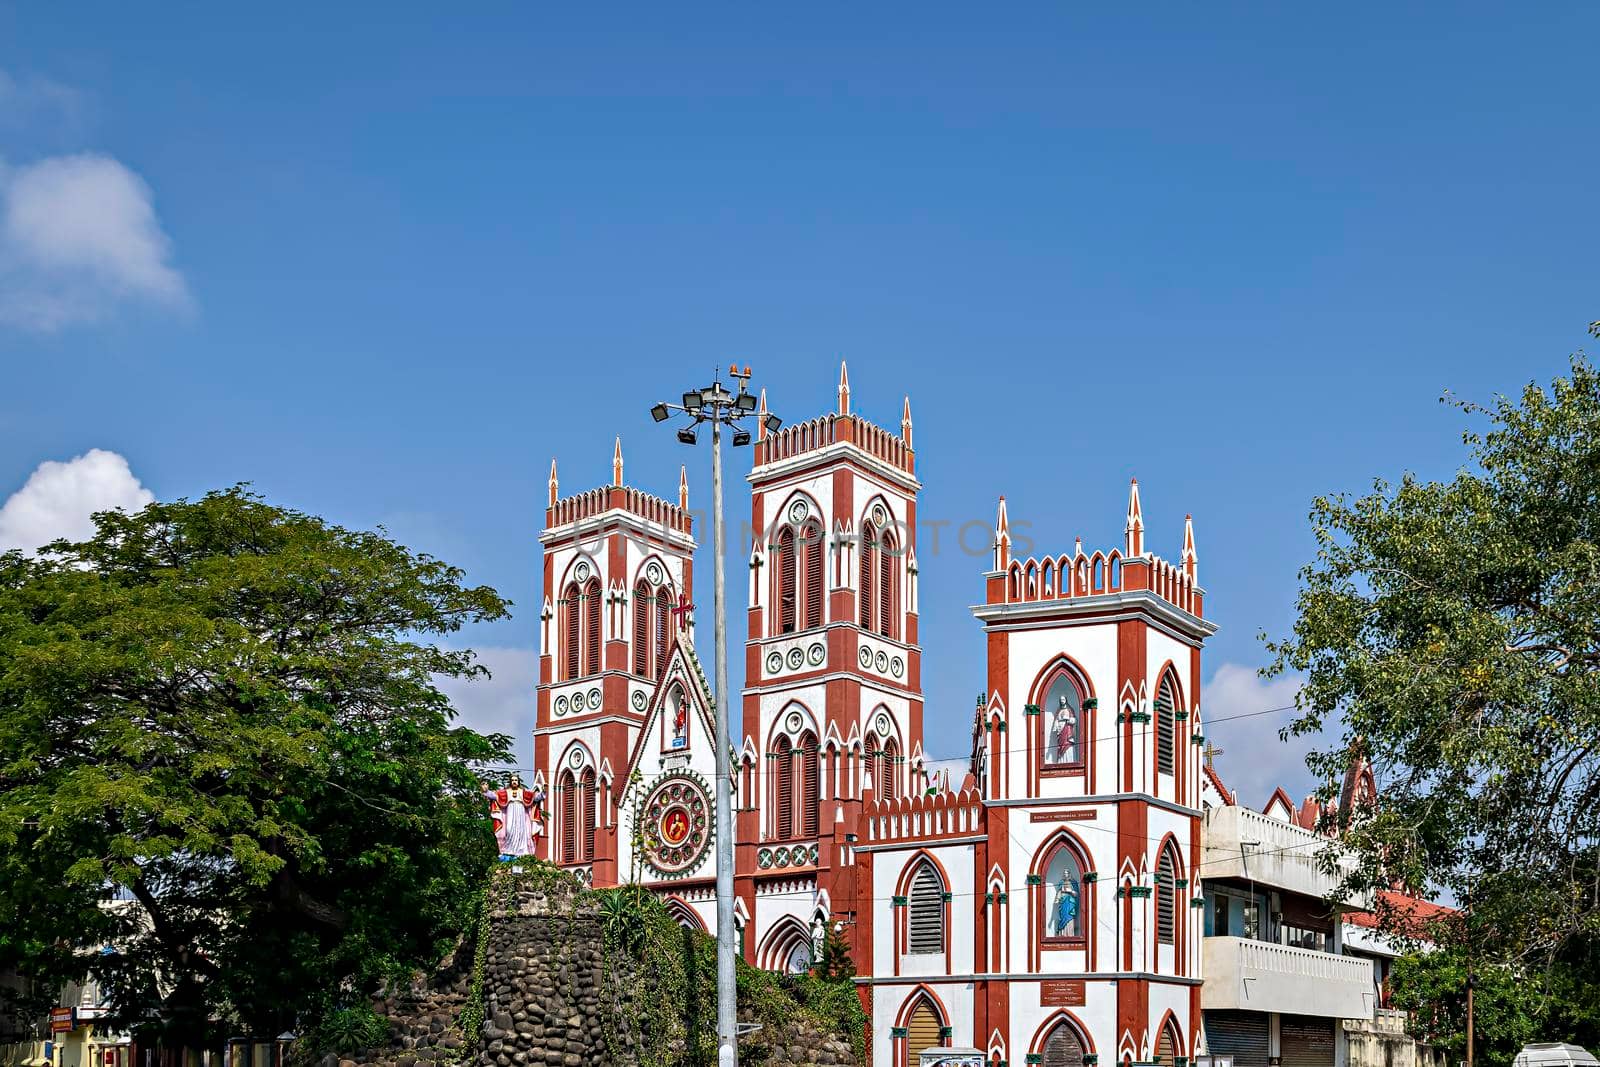 Basilica of the Sacred Heart of Jesus church situated on the south boulevard of Pondicherry, India, is an specimen of Gothic architecture.